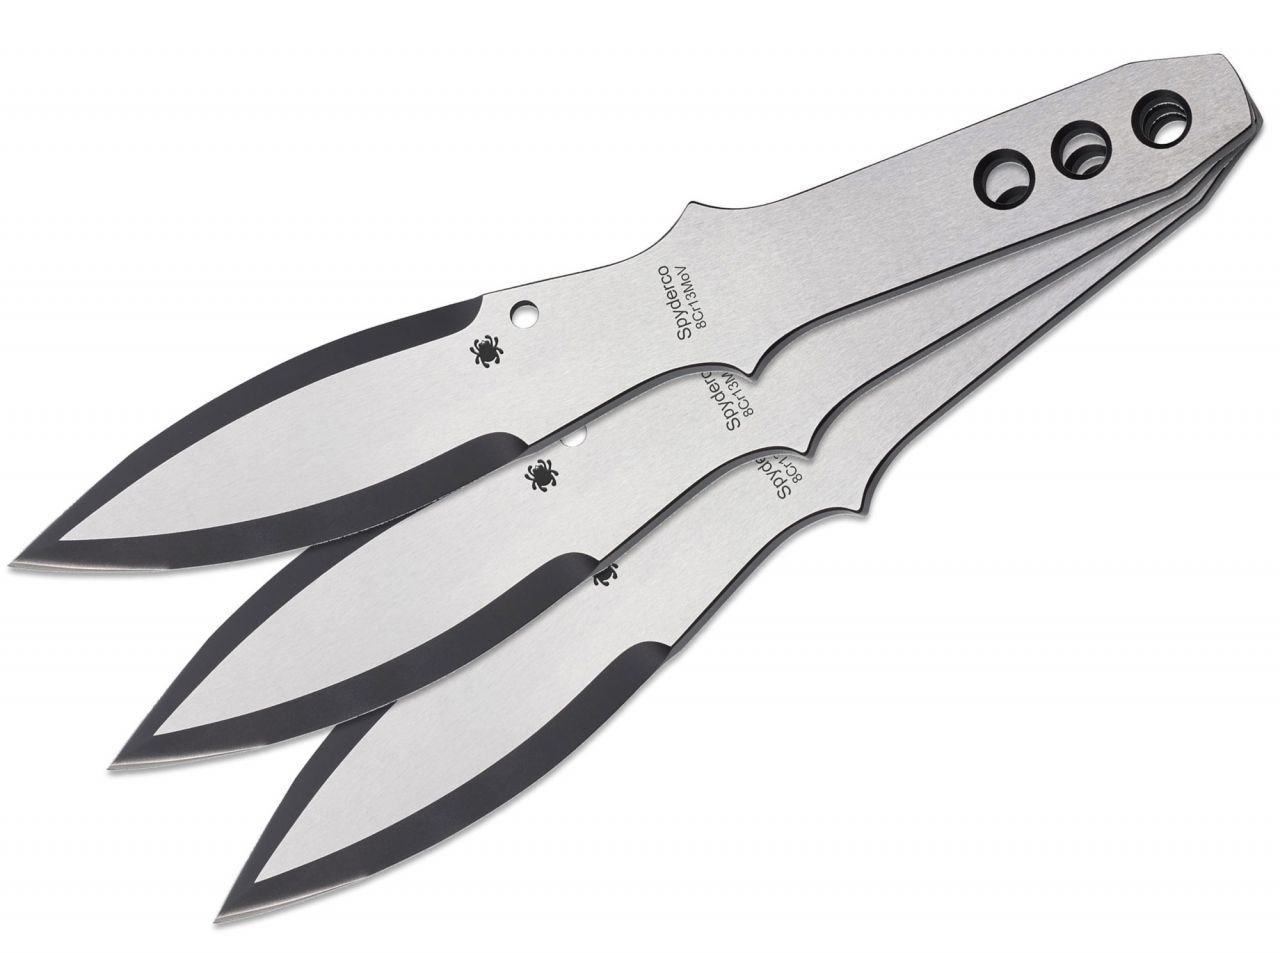 THROWING KNIVES SET - SPYDERTHROWERS - - SMALL | Military Tactical \ Knives militarysurplus.eu | Army Navy Surplus - Tactical | Big variety Cheap prices | Military Surplus, Clothing, Law Enforcement, Boots, Outdoor & Tactical Gear